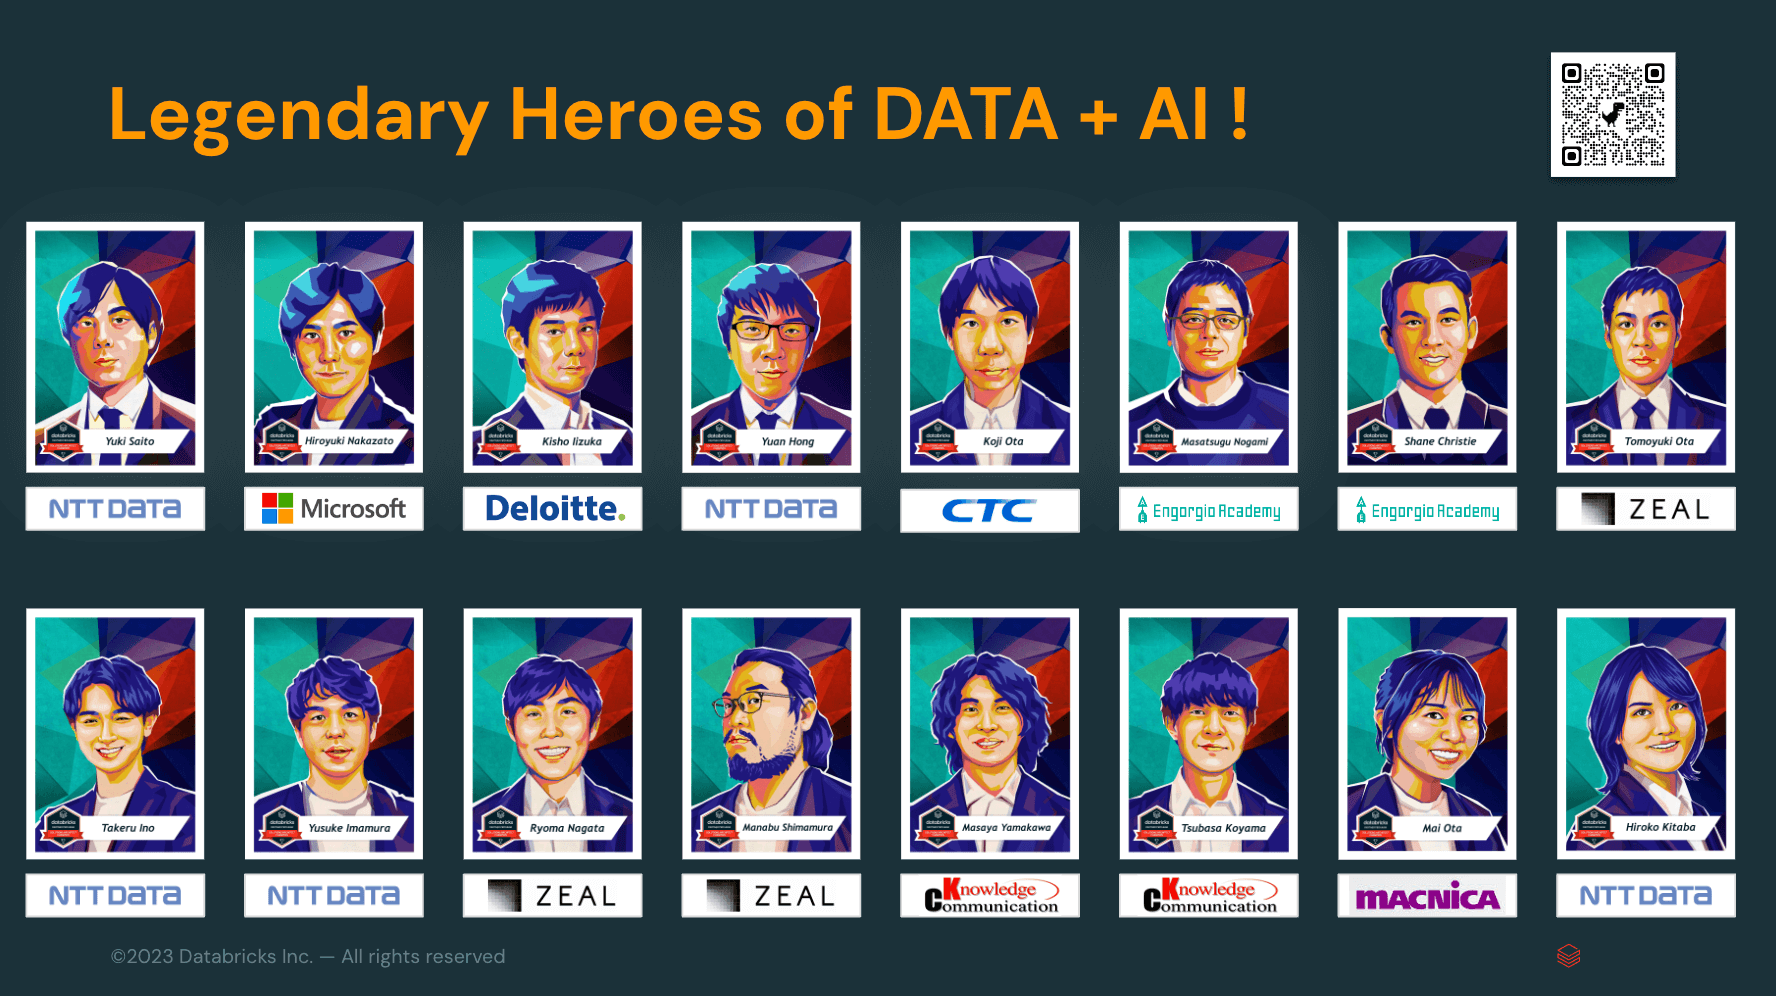 Portrates of Legendary Heroes of Data+AI-2